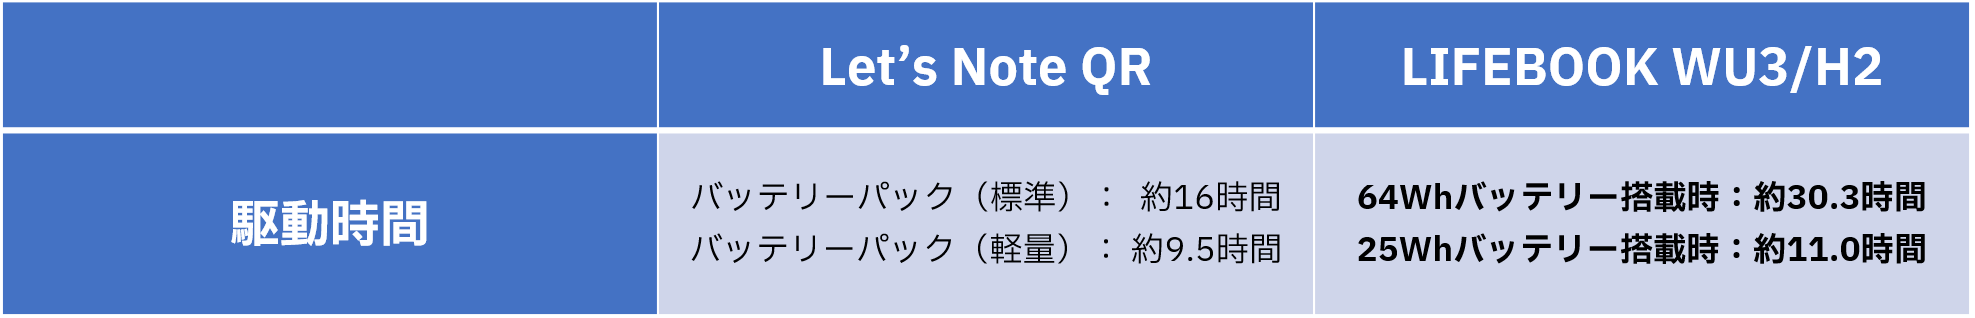 Let's Note QRとLIFEBOOK WU3/H2のバッテリー駆動時間